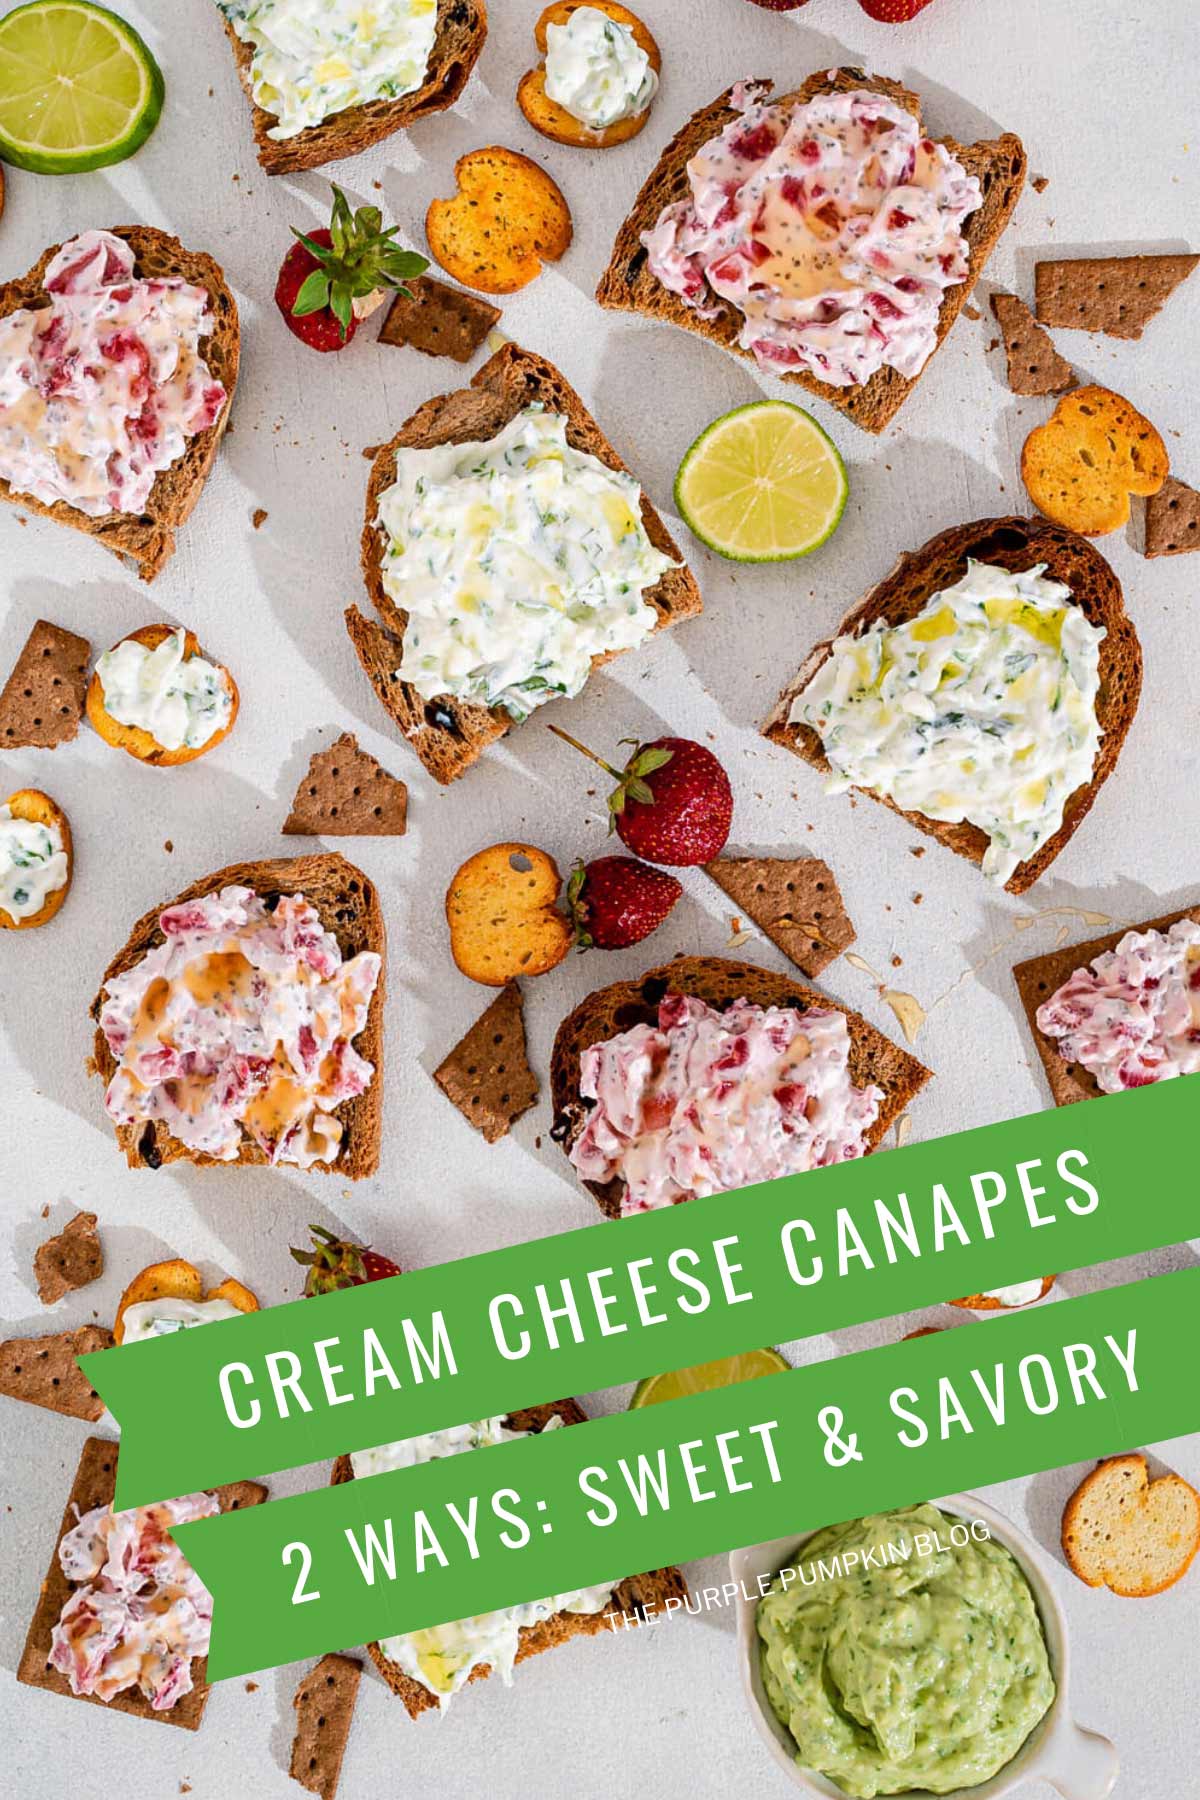 Cream-Cheese-Canapes-2-Ways-Sweet-Savory